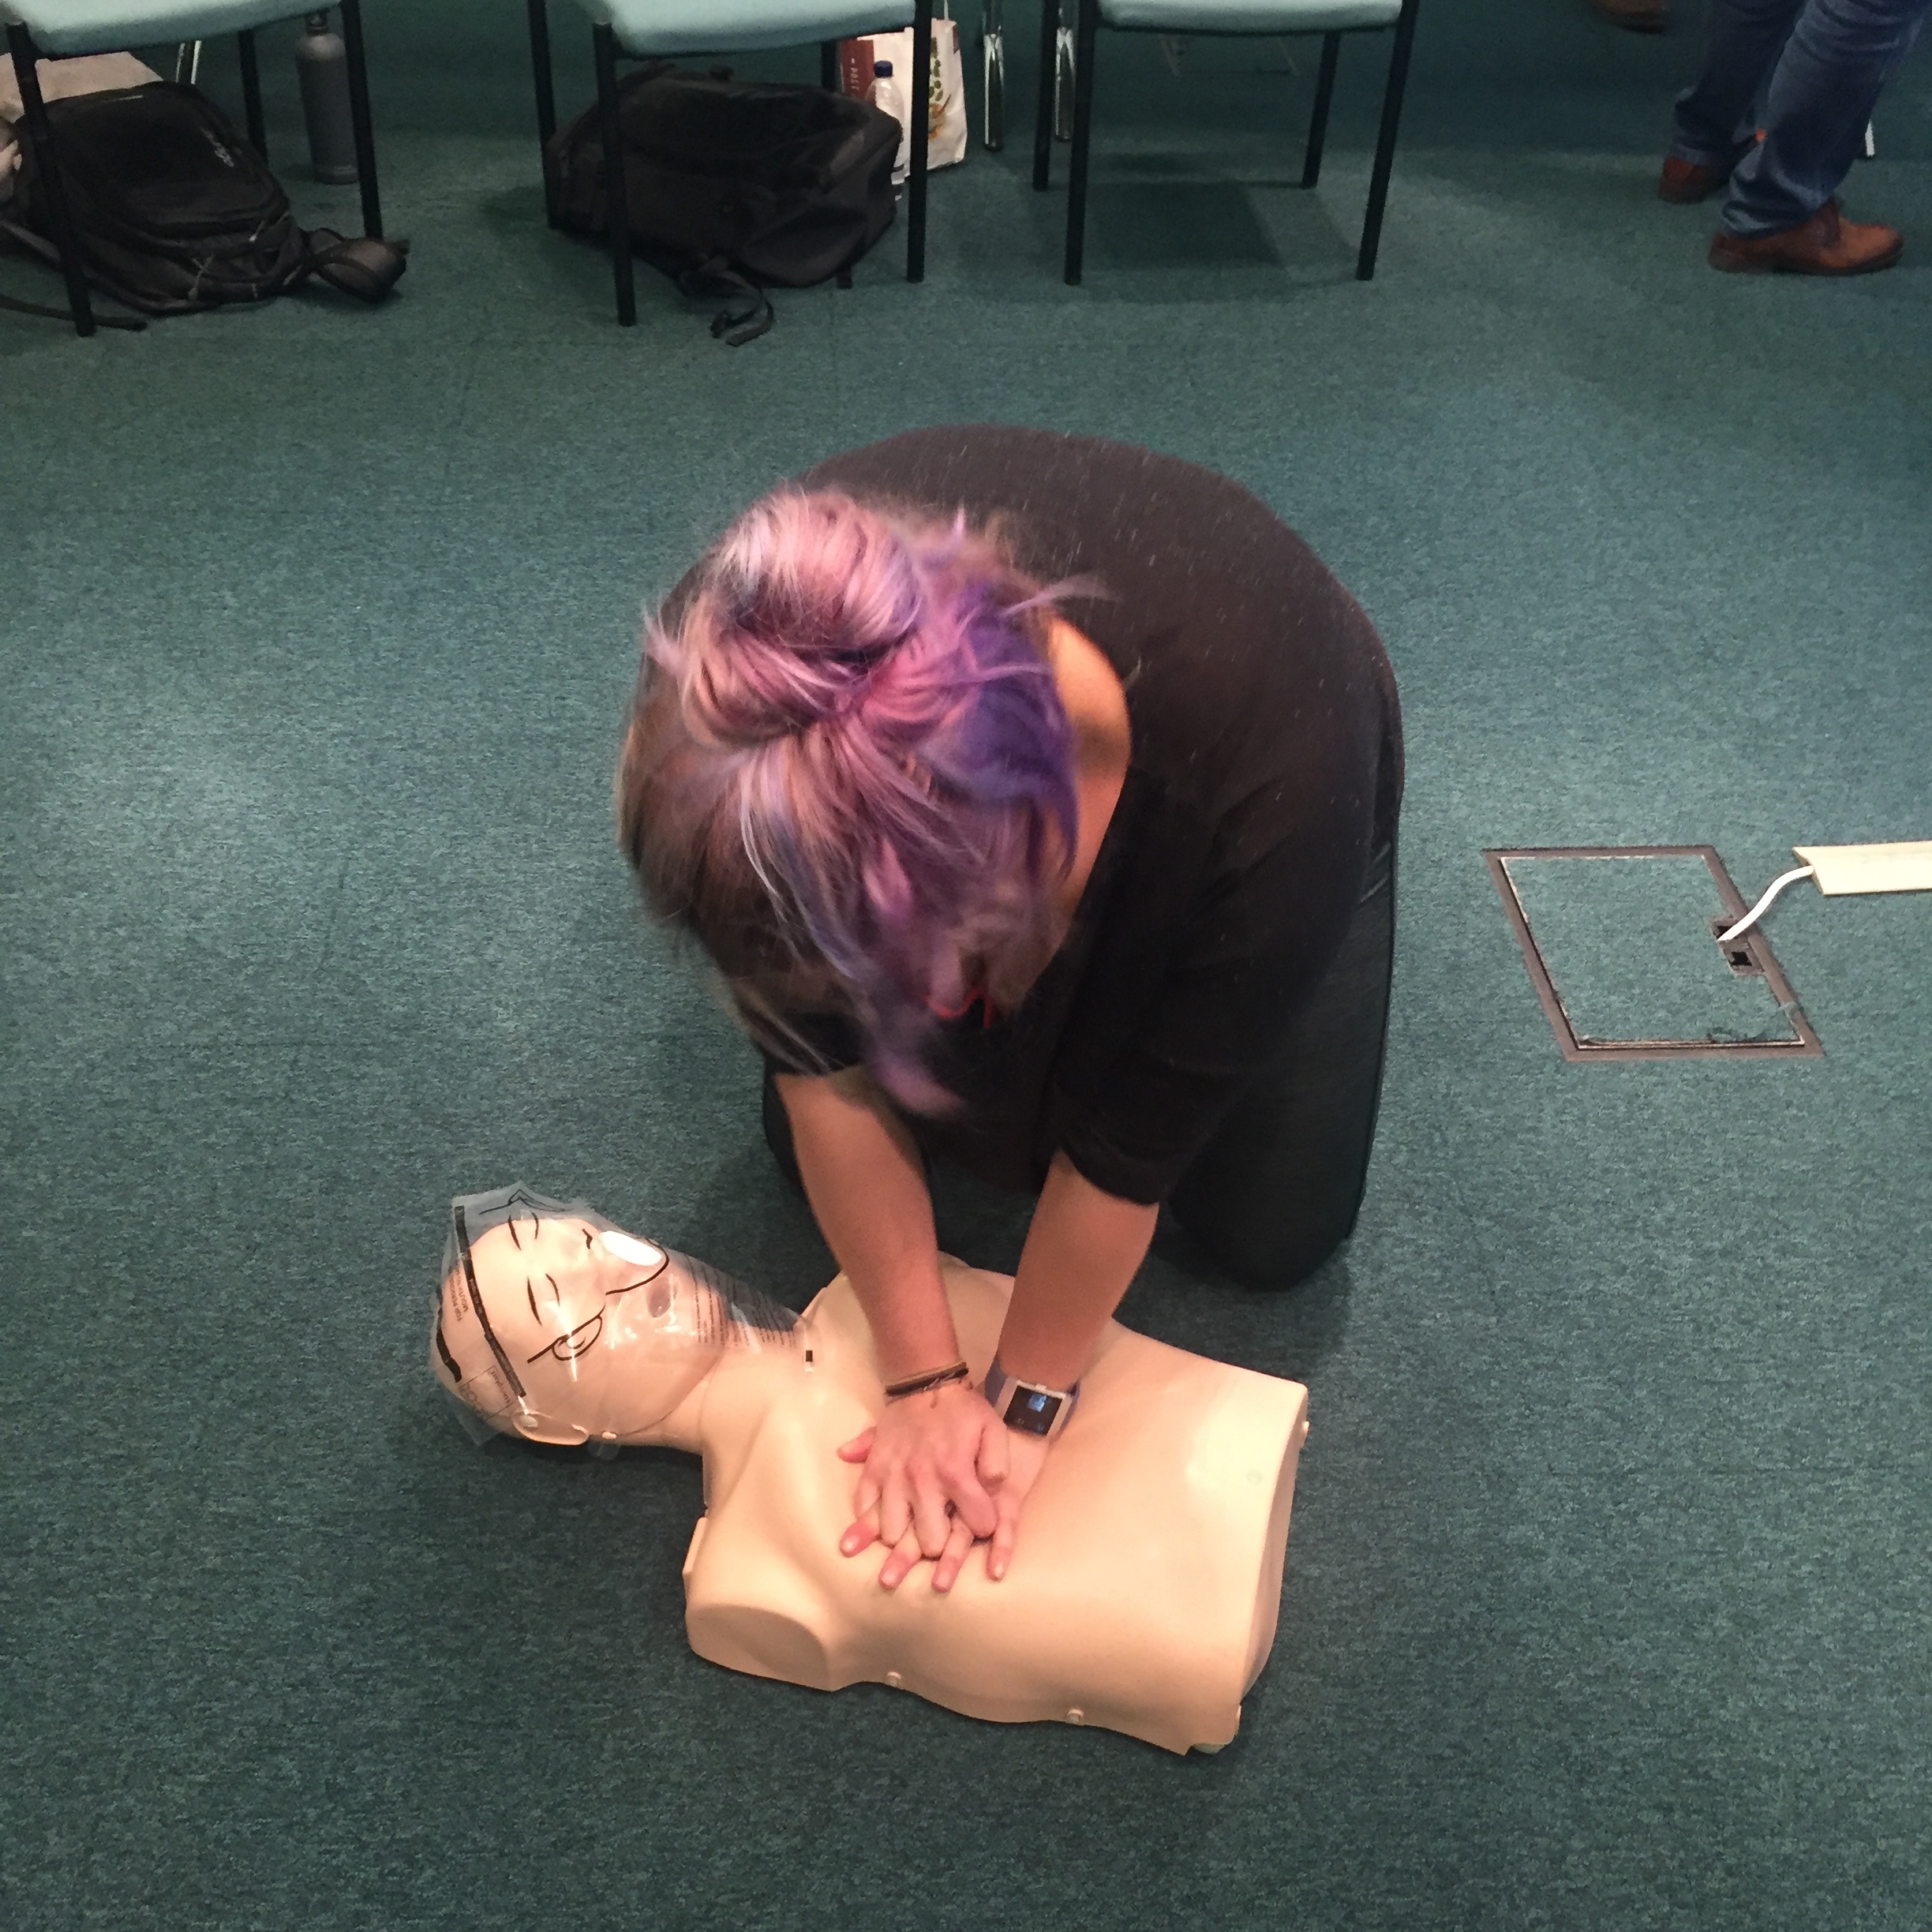 Jess simulating CPR at First Aid Training